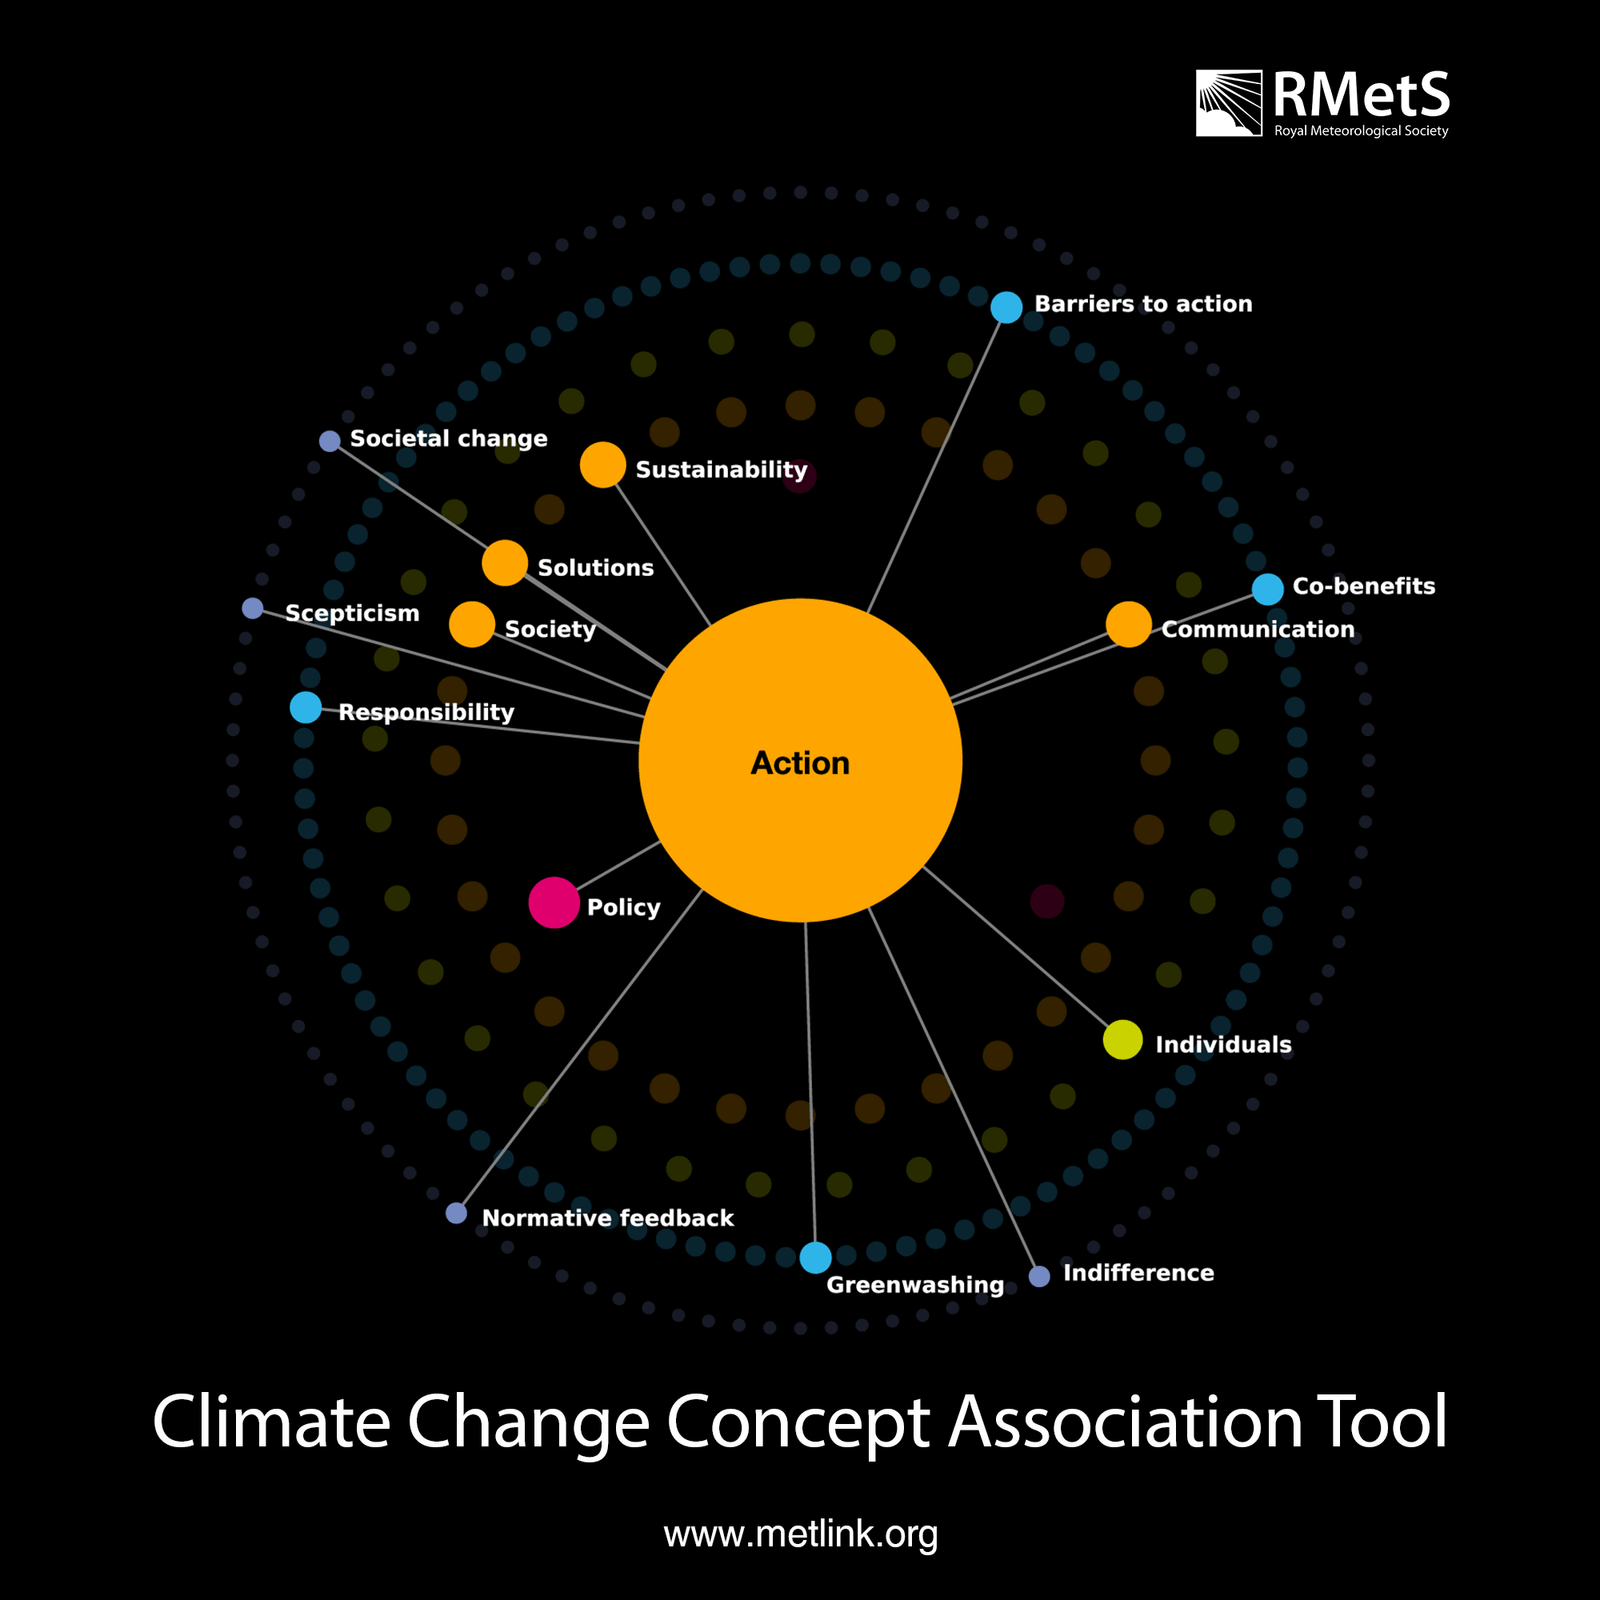 Black background with colourful spider diagram showing climate concepts